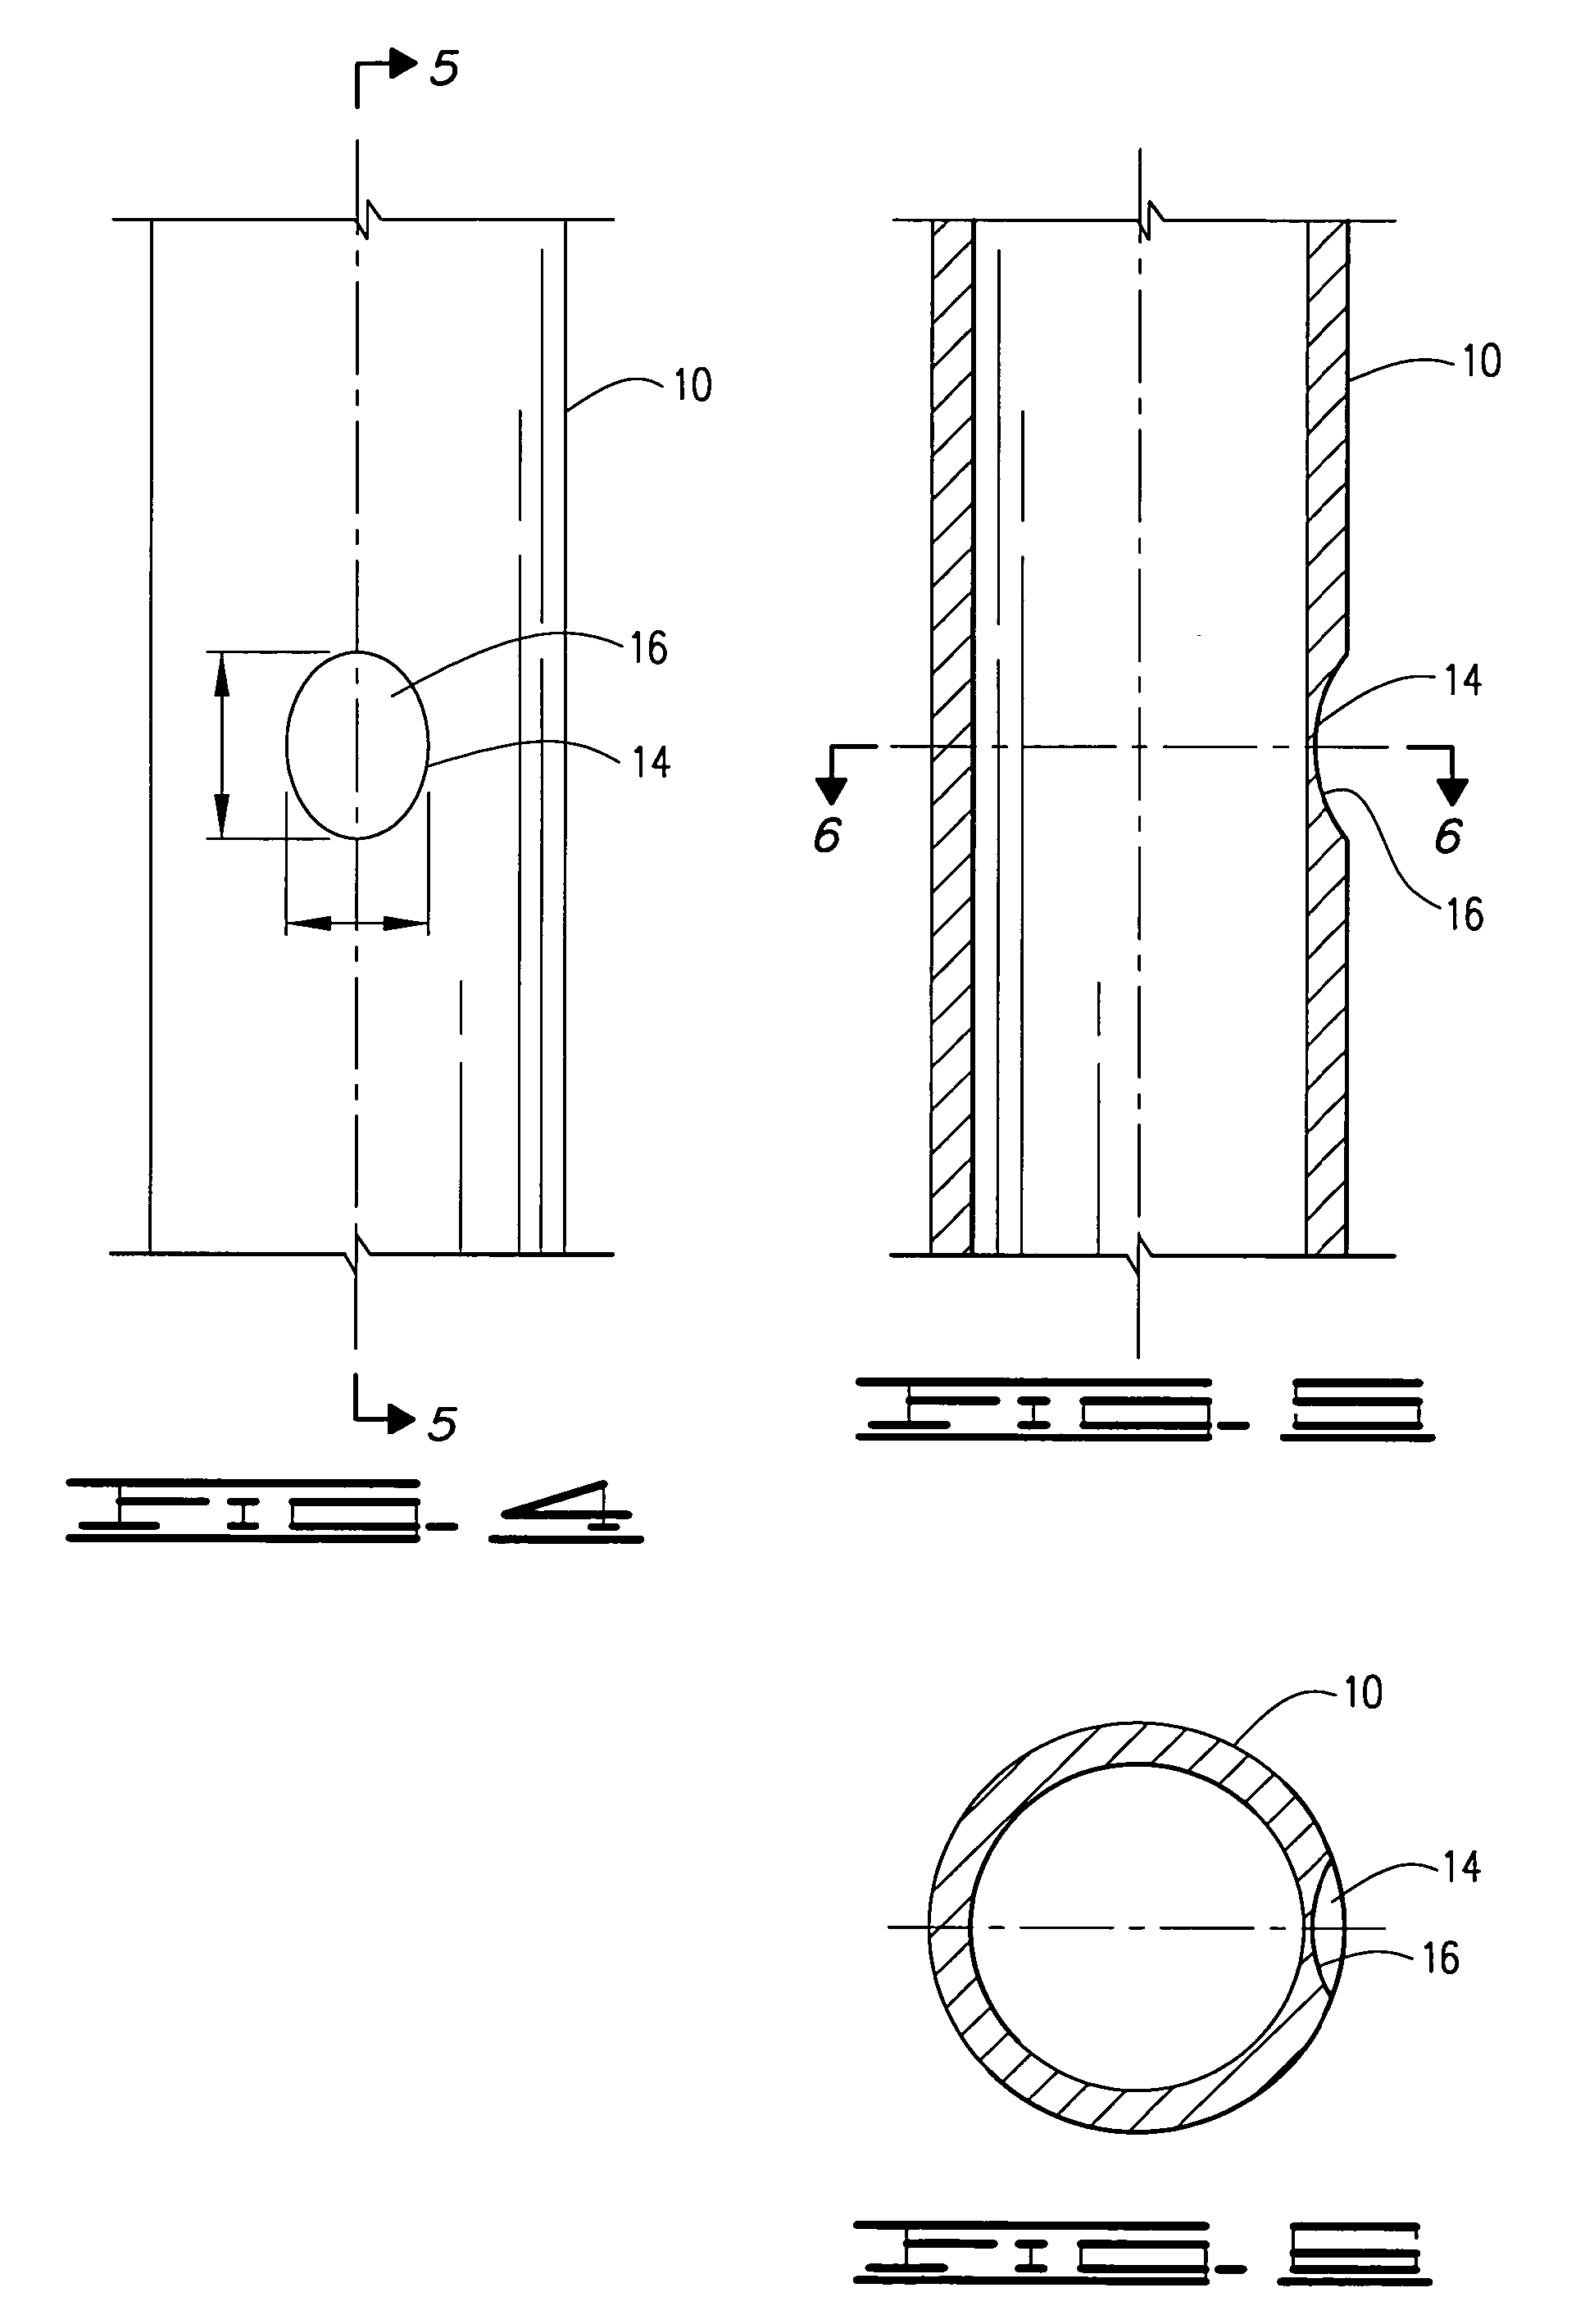 Minimal resistance scallop for a well perforating device